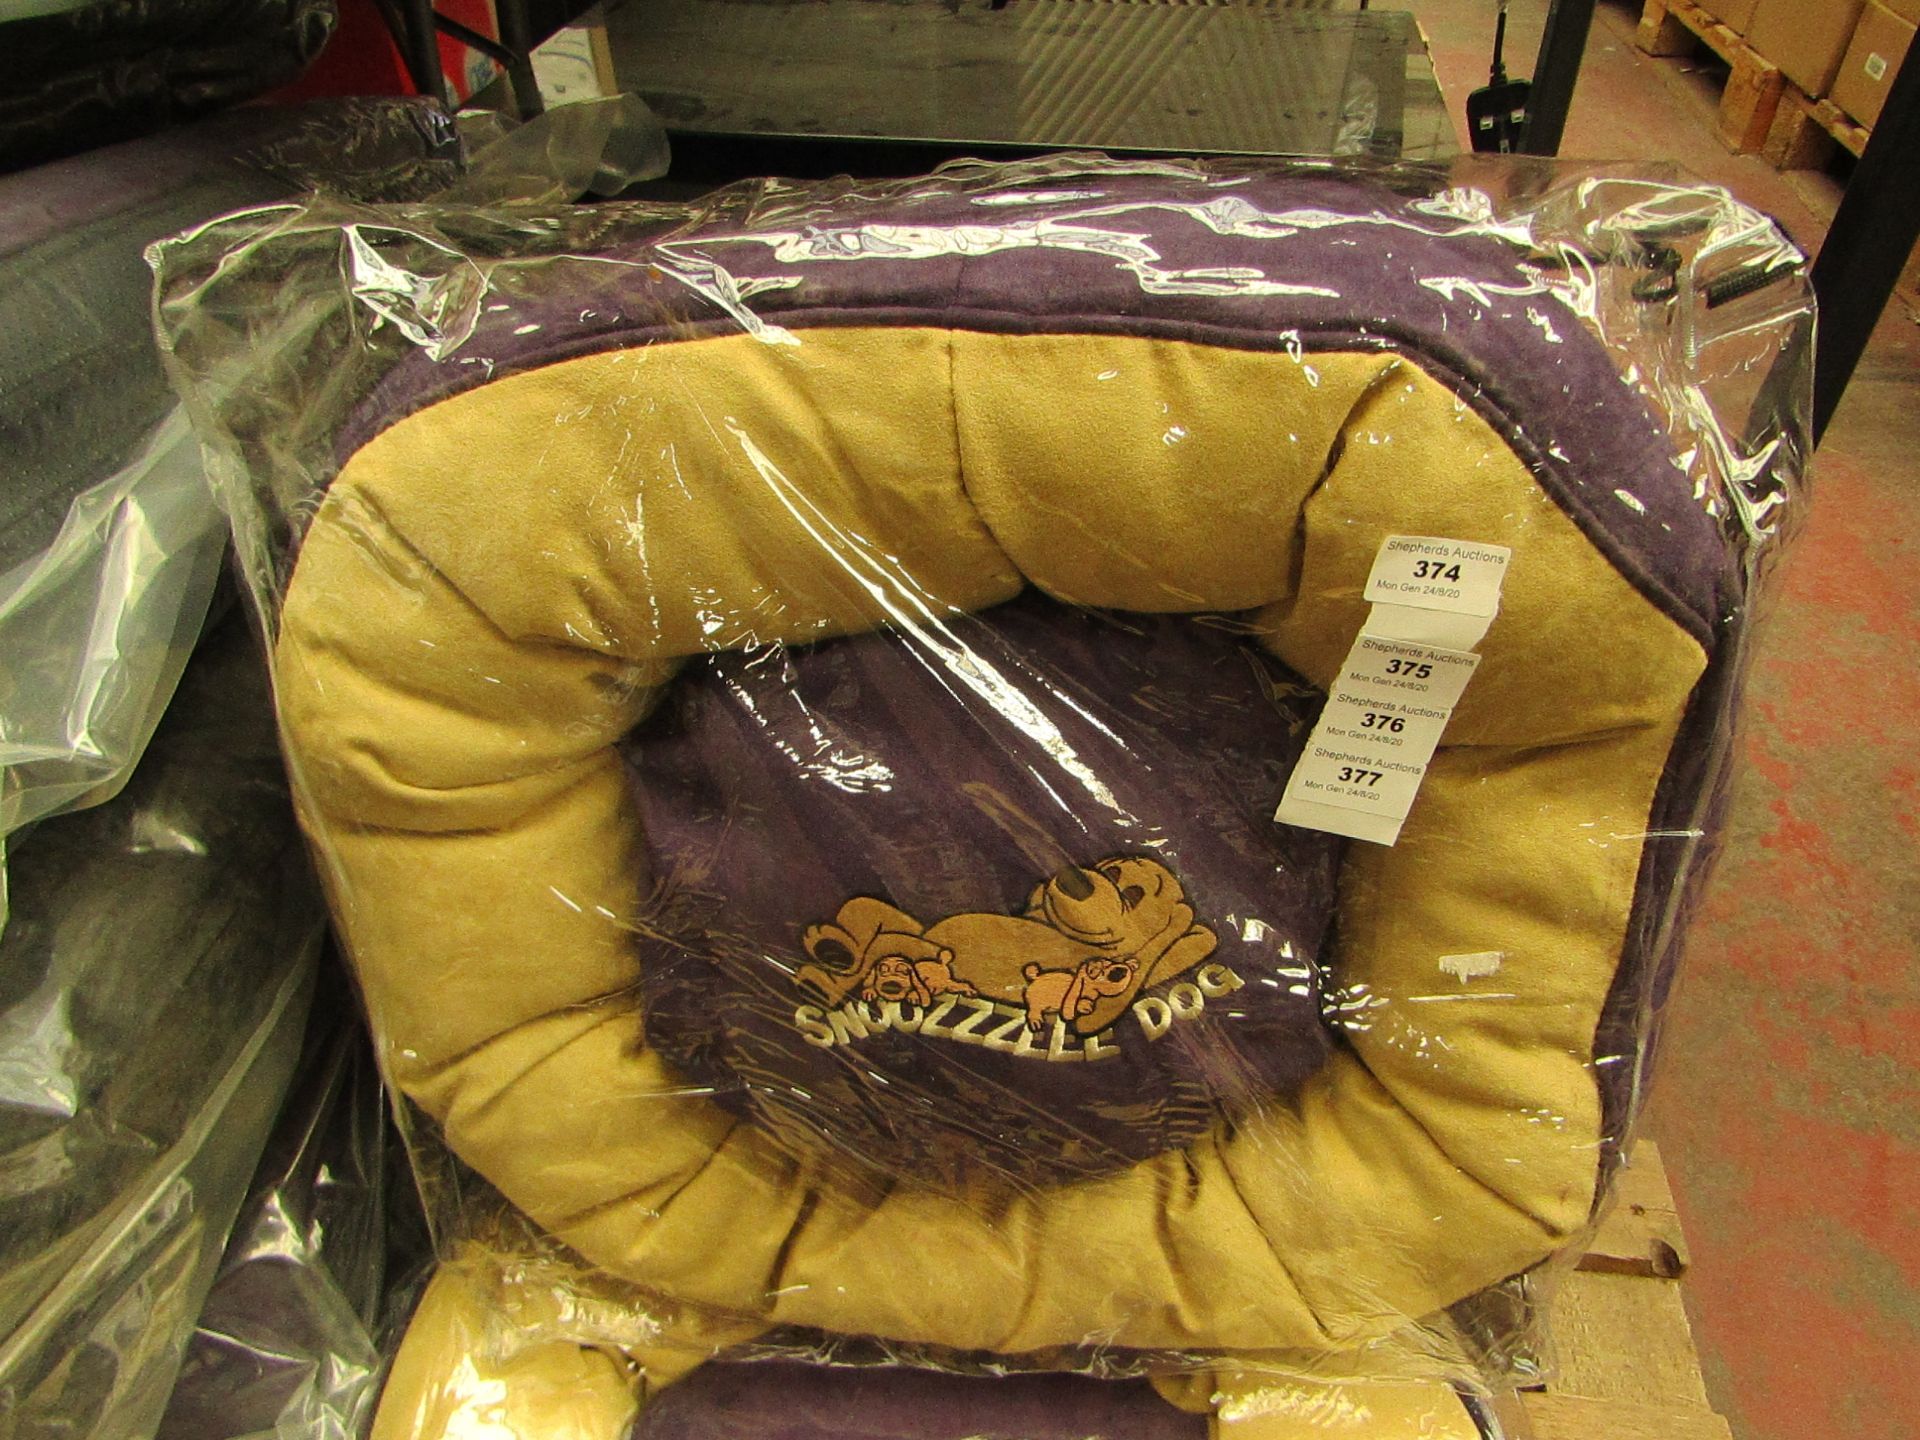 Snoozzzeee Dog - Purple Donut Dog Bed - Size 1 - New & Packaged.